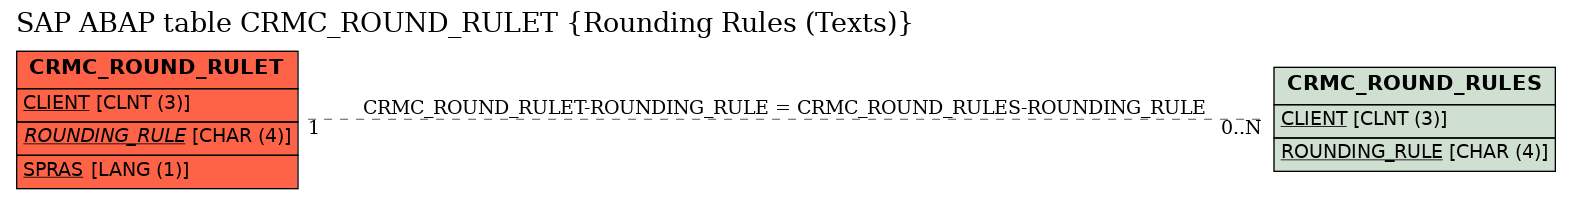 E-R Diagram for table CRMC_ROUND_RULET (Rounding Rules (Texts))